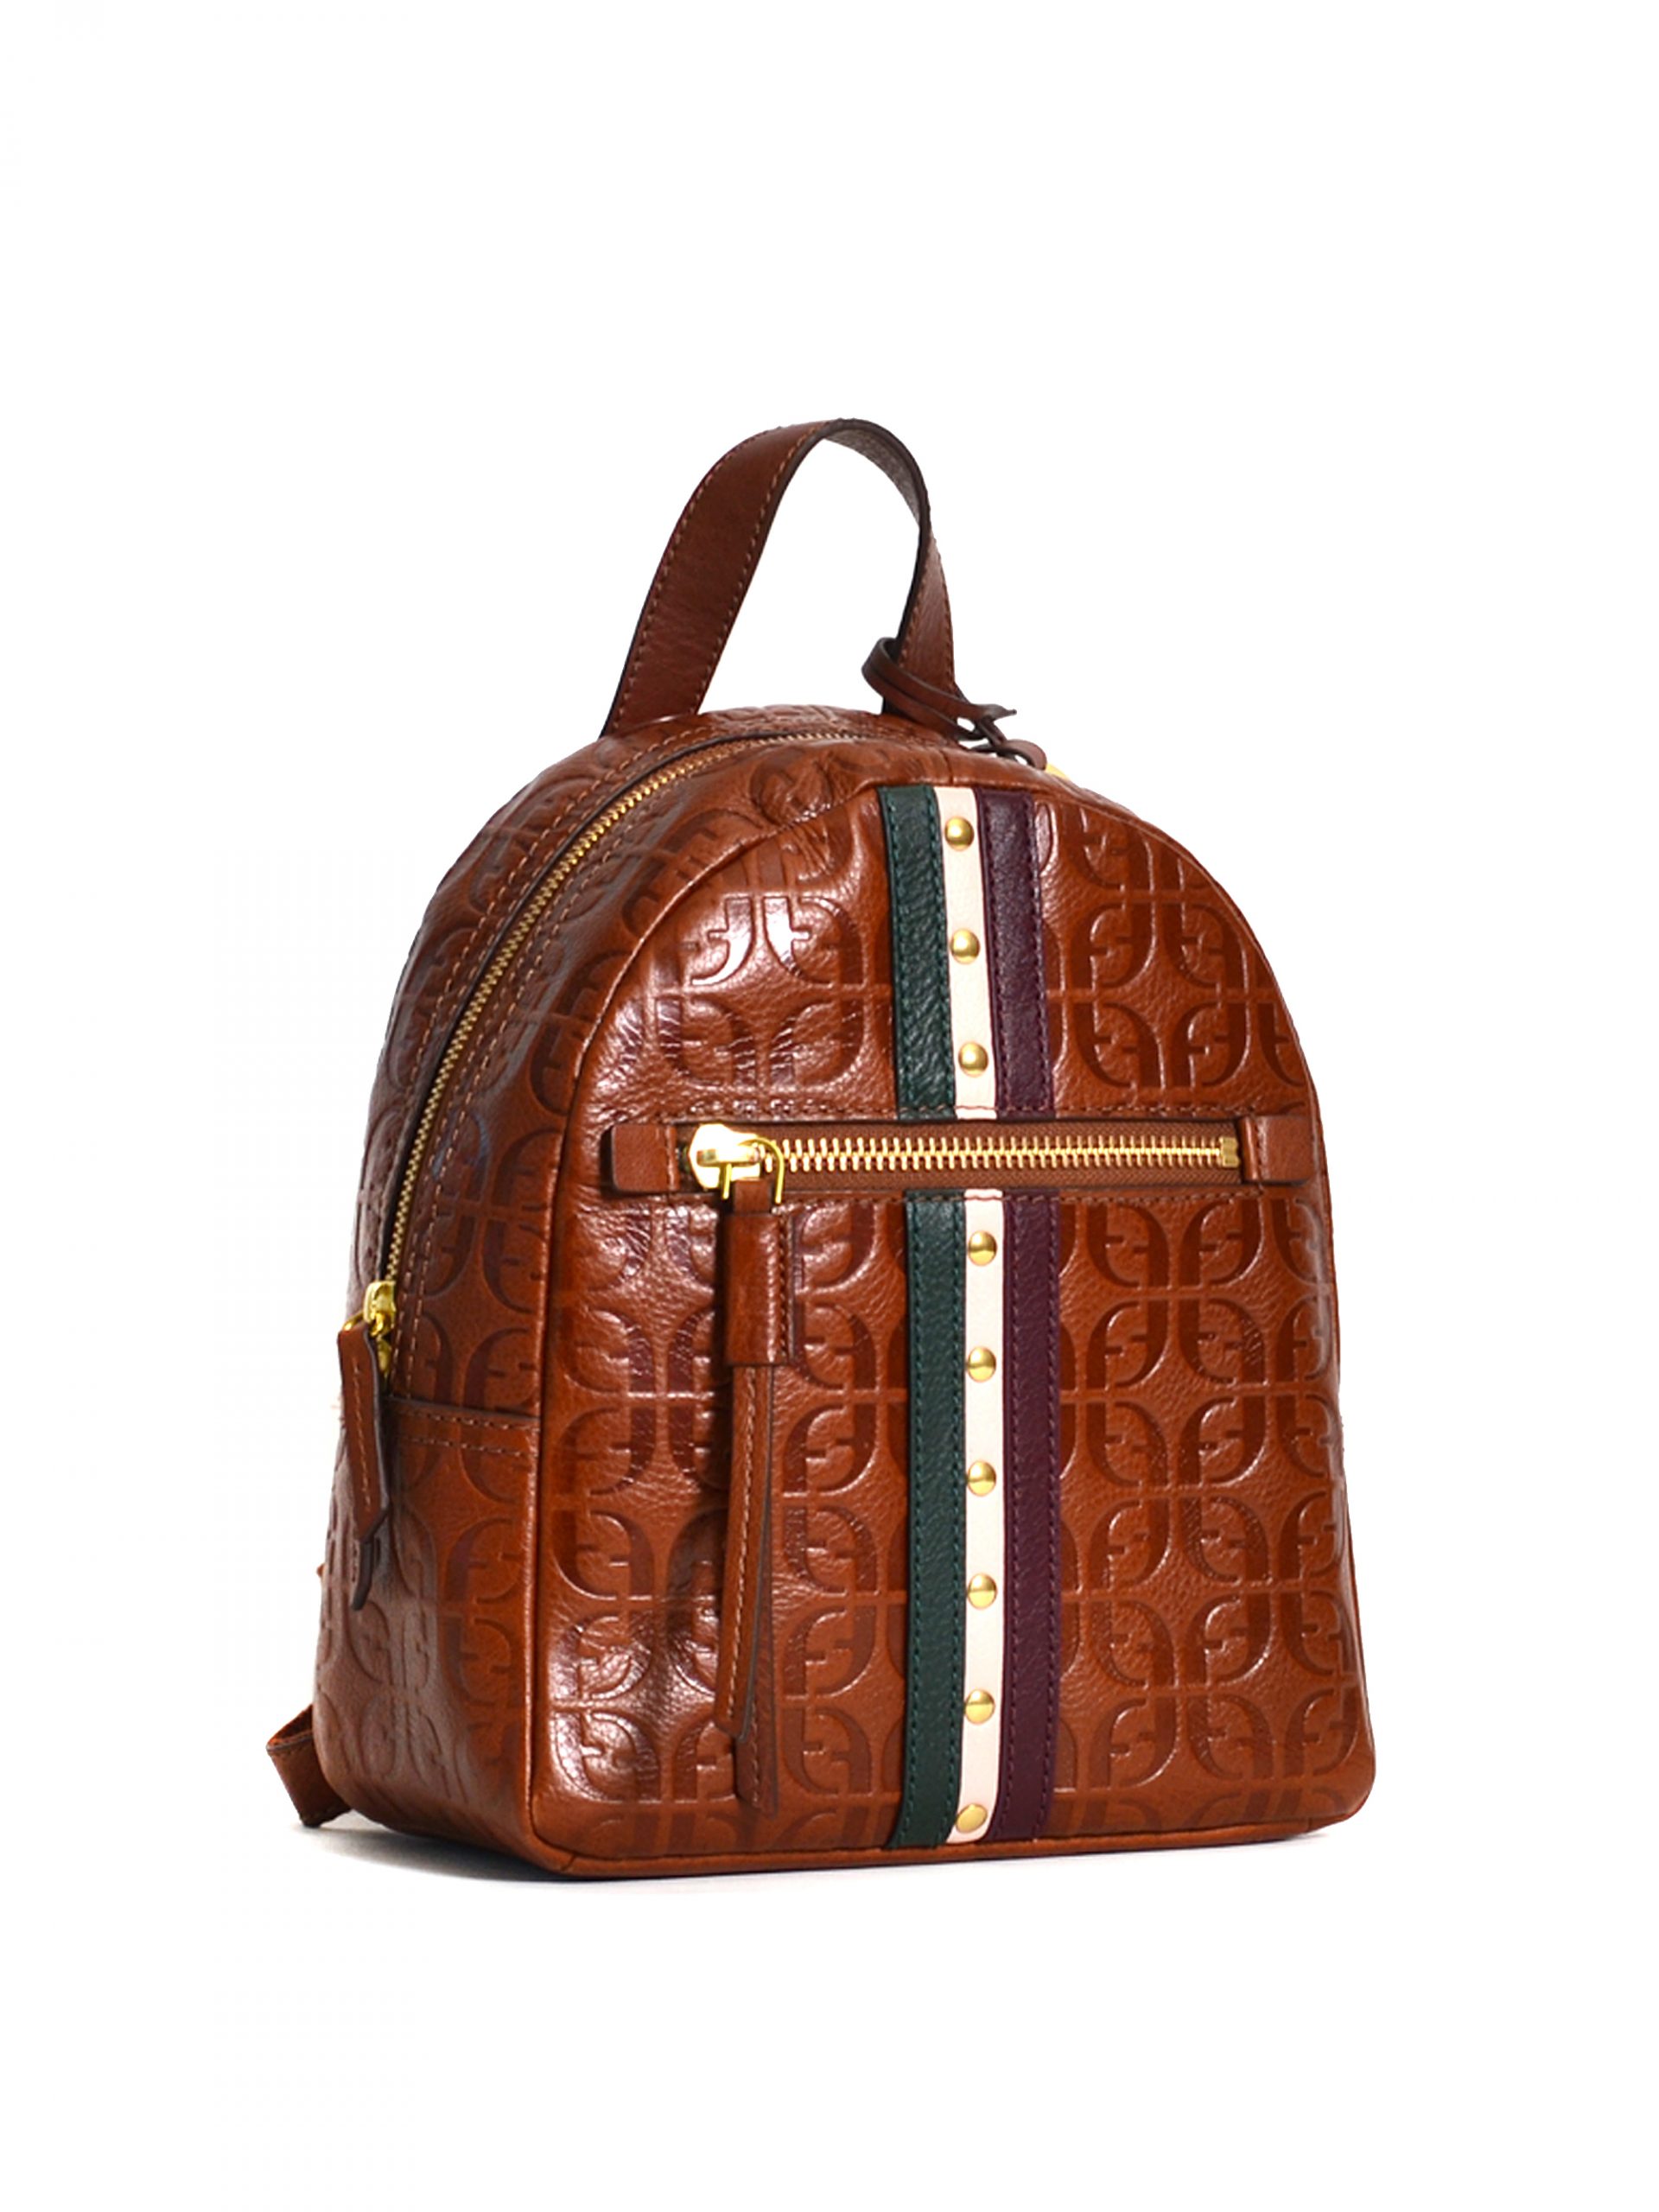 Fortress Commotion domesticate Fossil Megan Backpack Brown Multi - Averand